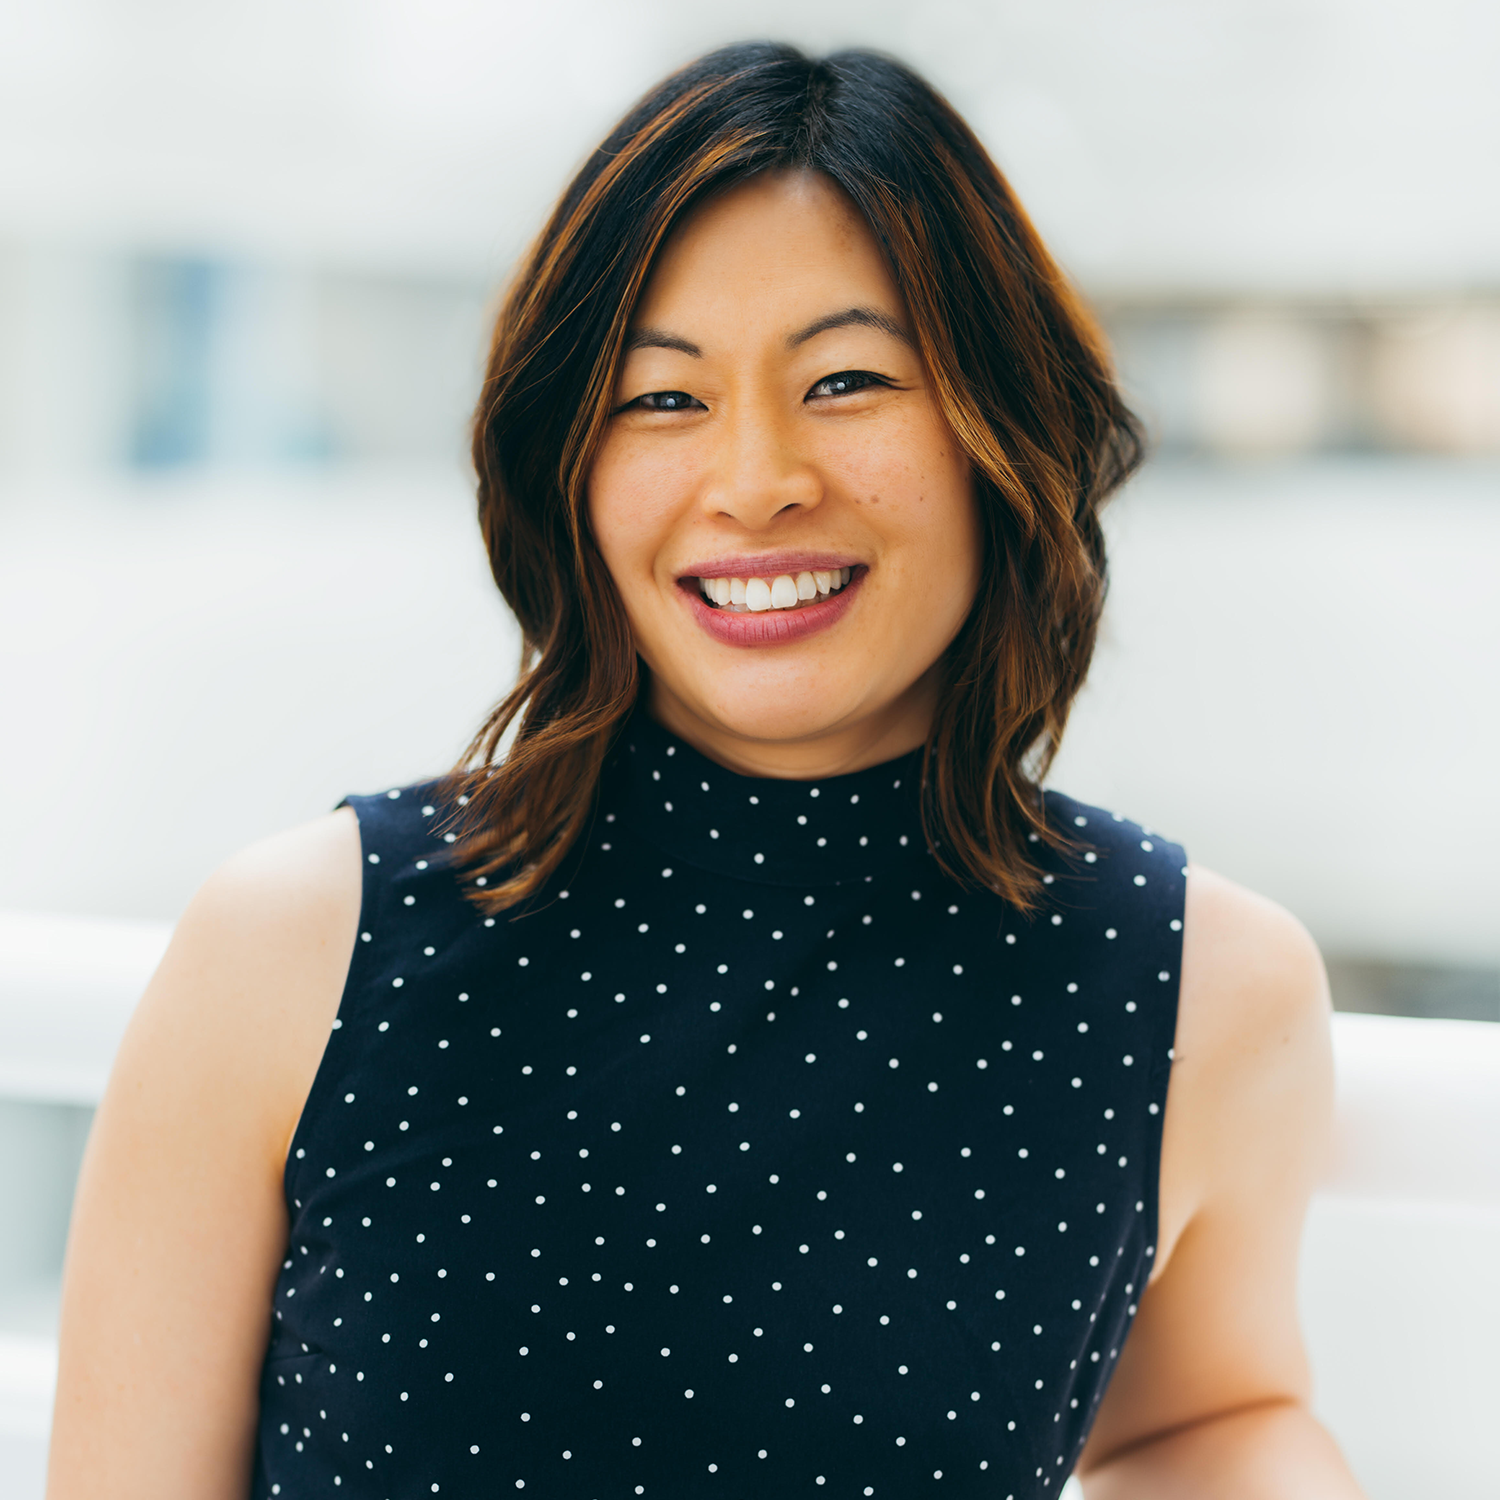 A photo of Eva Wong, co-founder of Borrowell